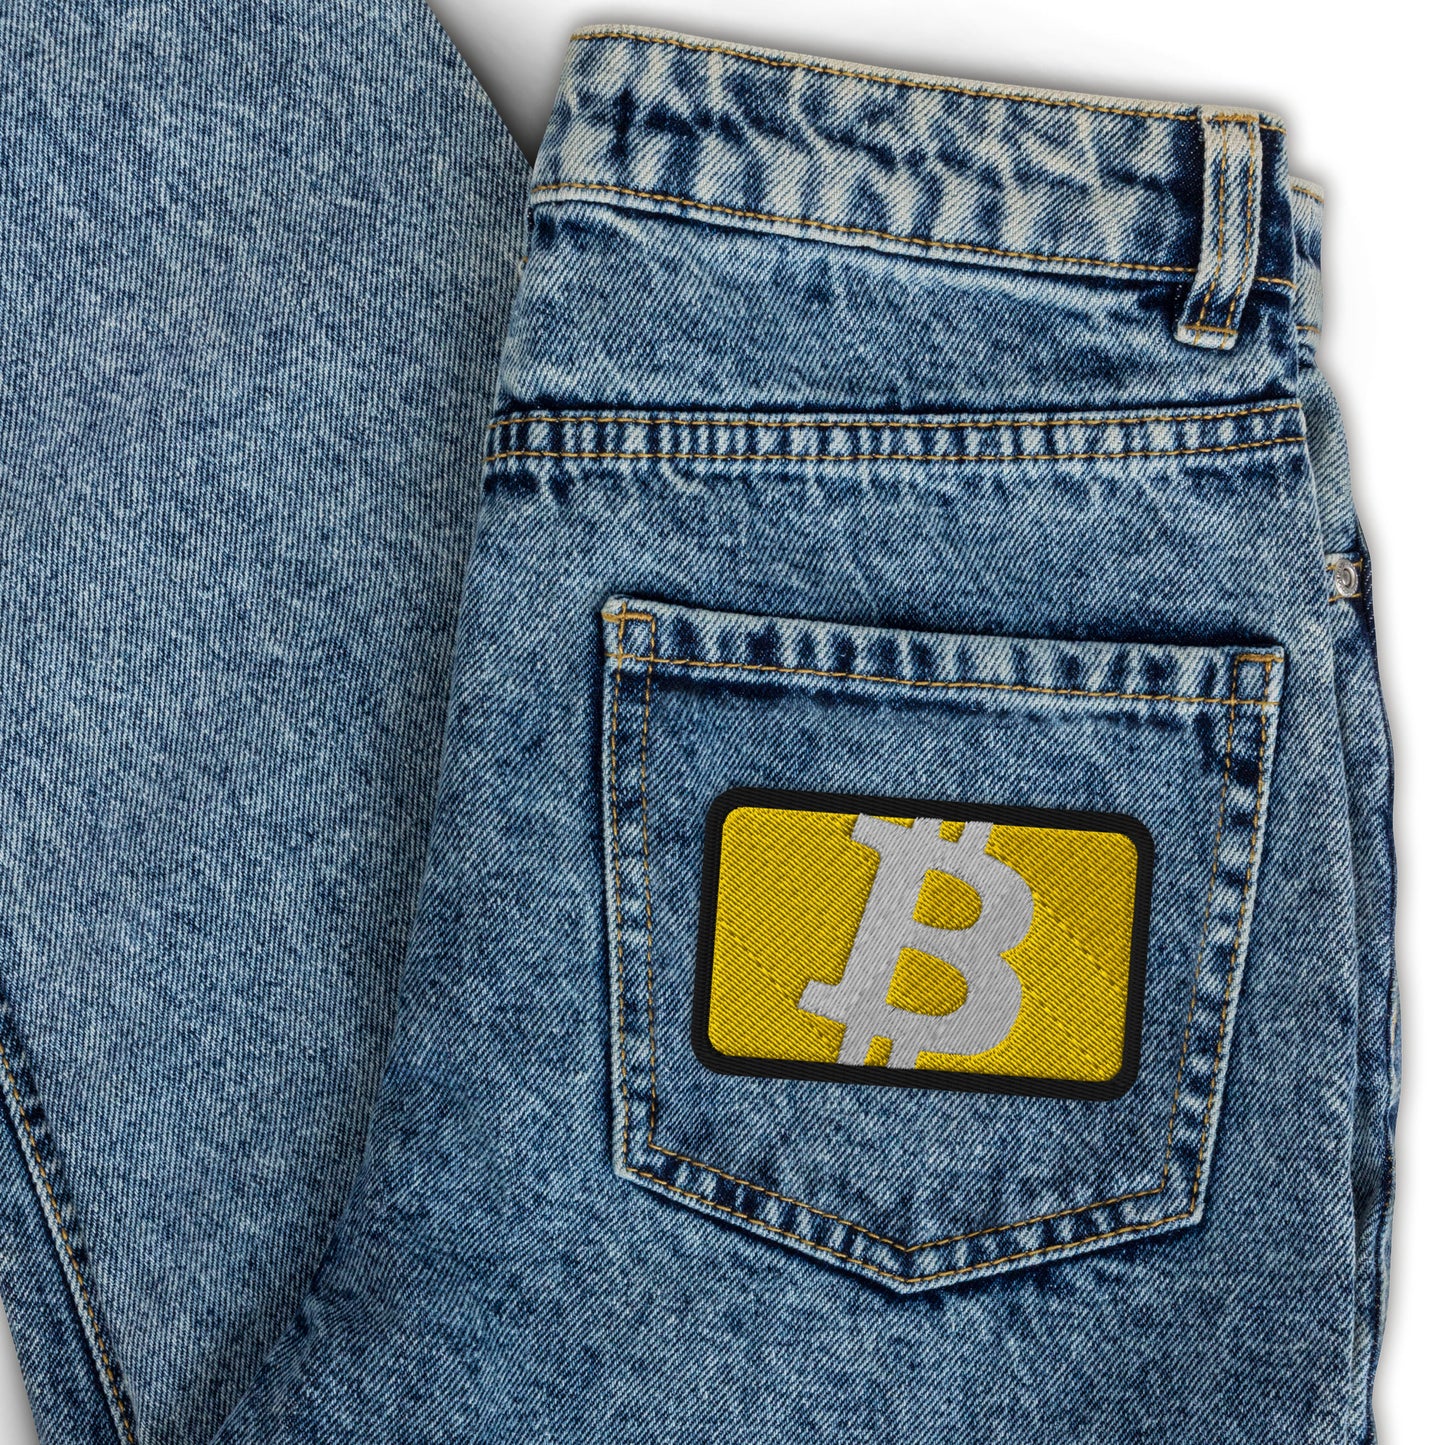 Embroidered patches with bitcoin